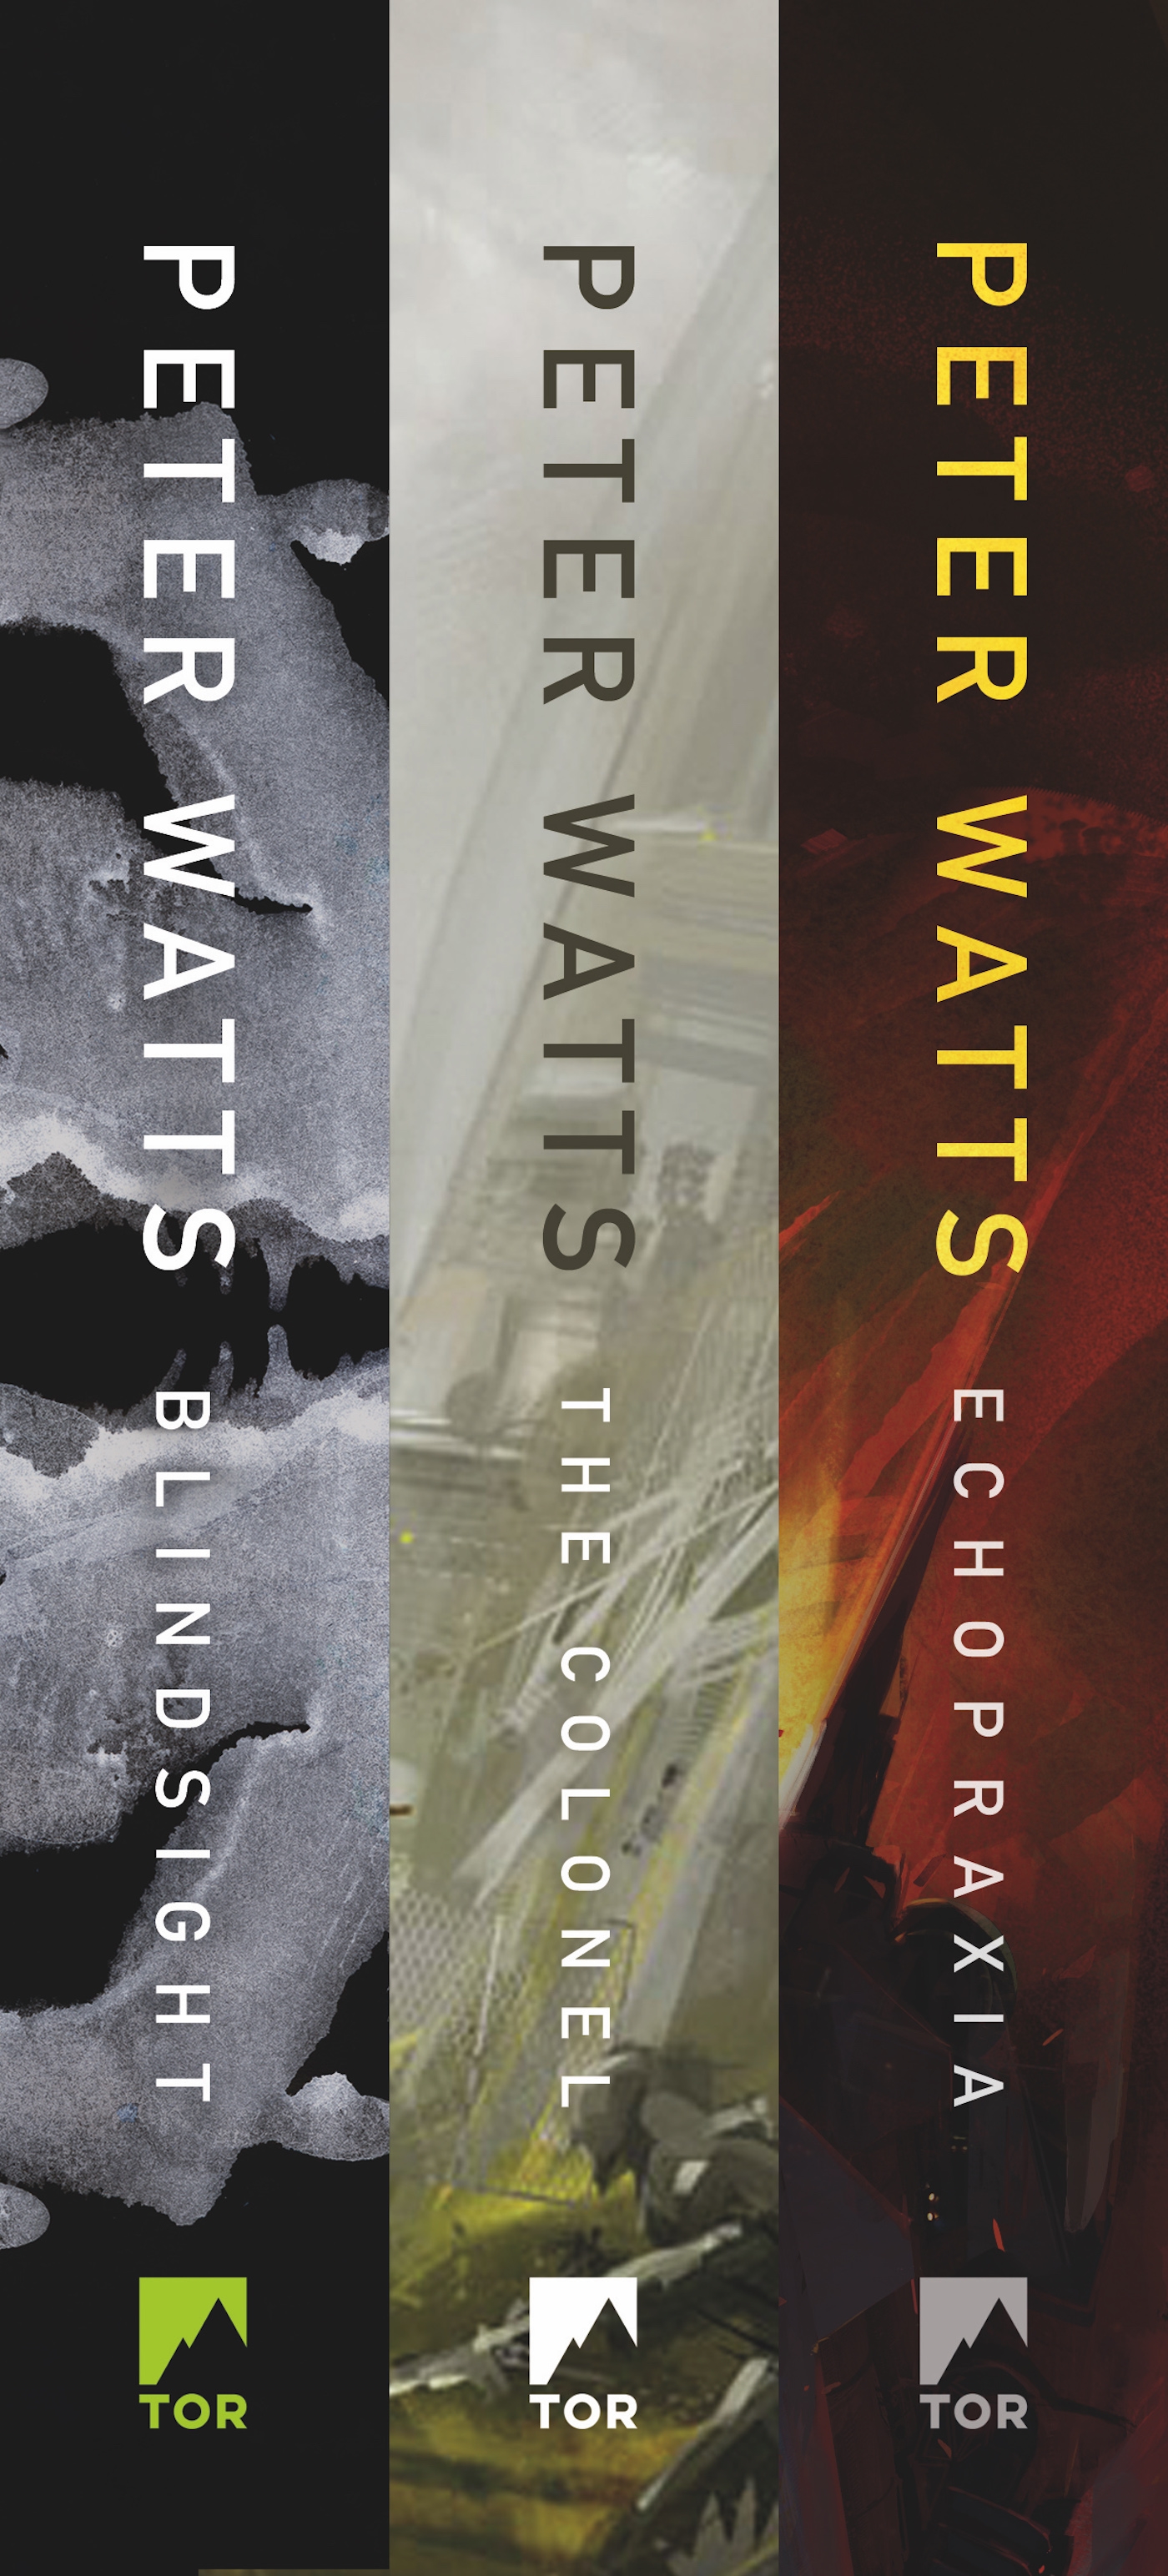 The Firefall Series : Blindsight, Echopraxia, The Colonel by Peter Watts